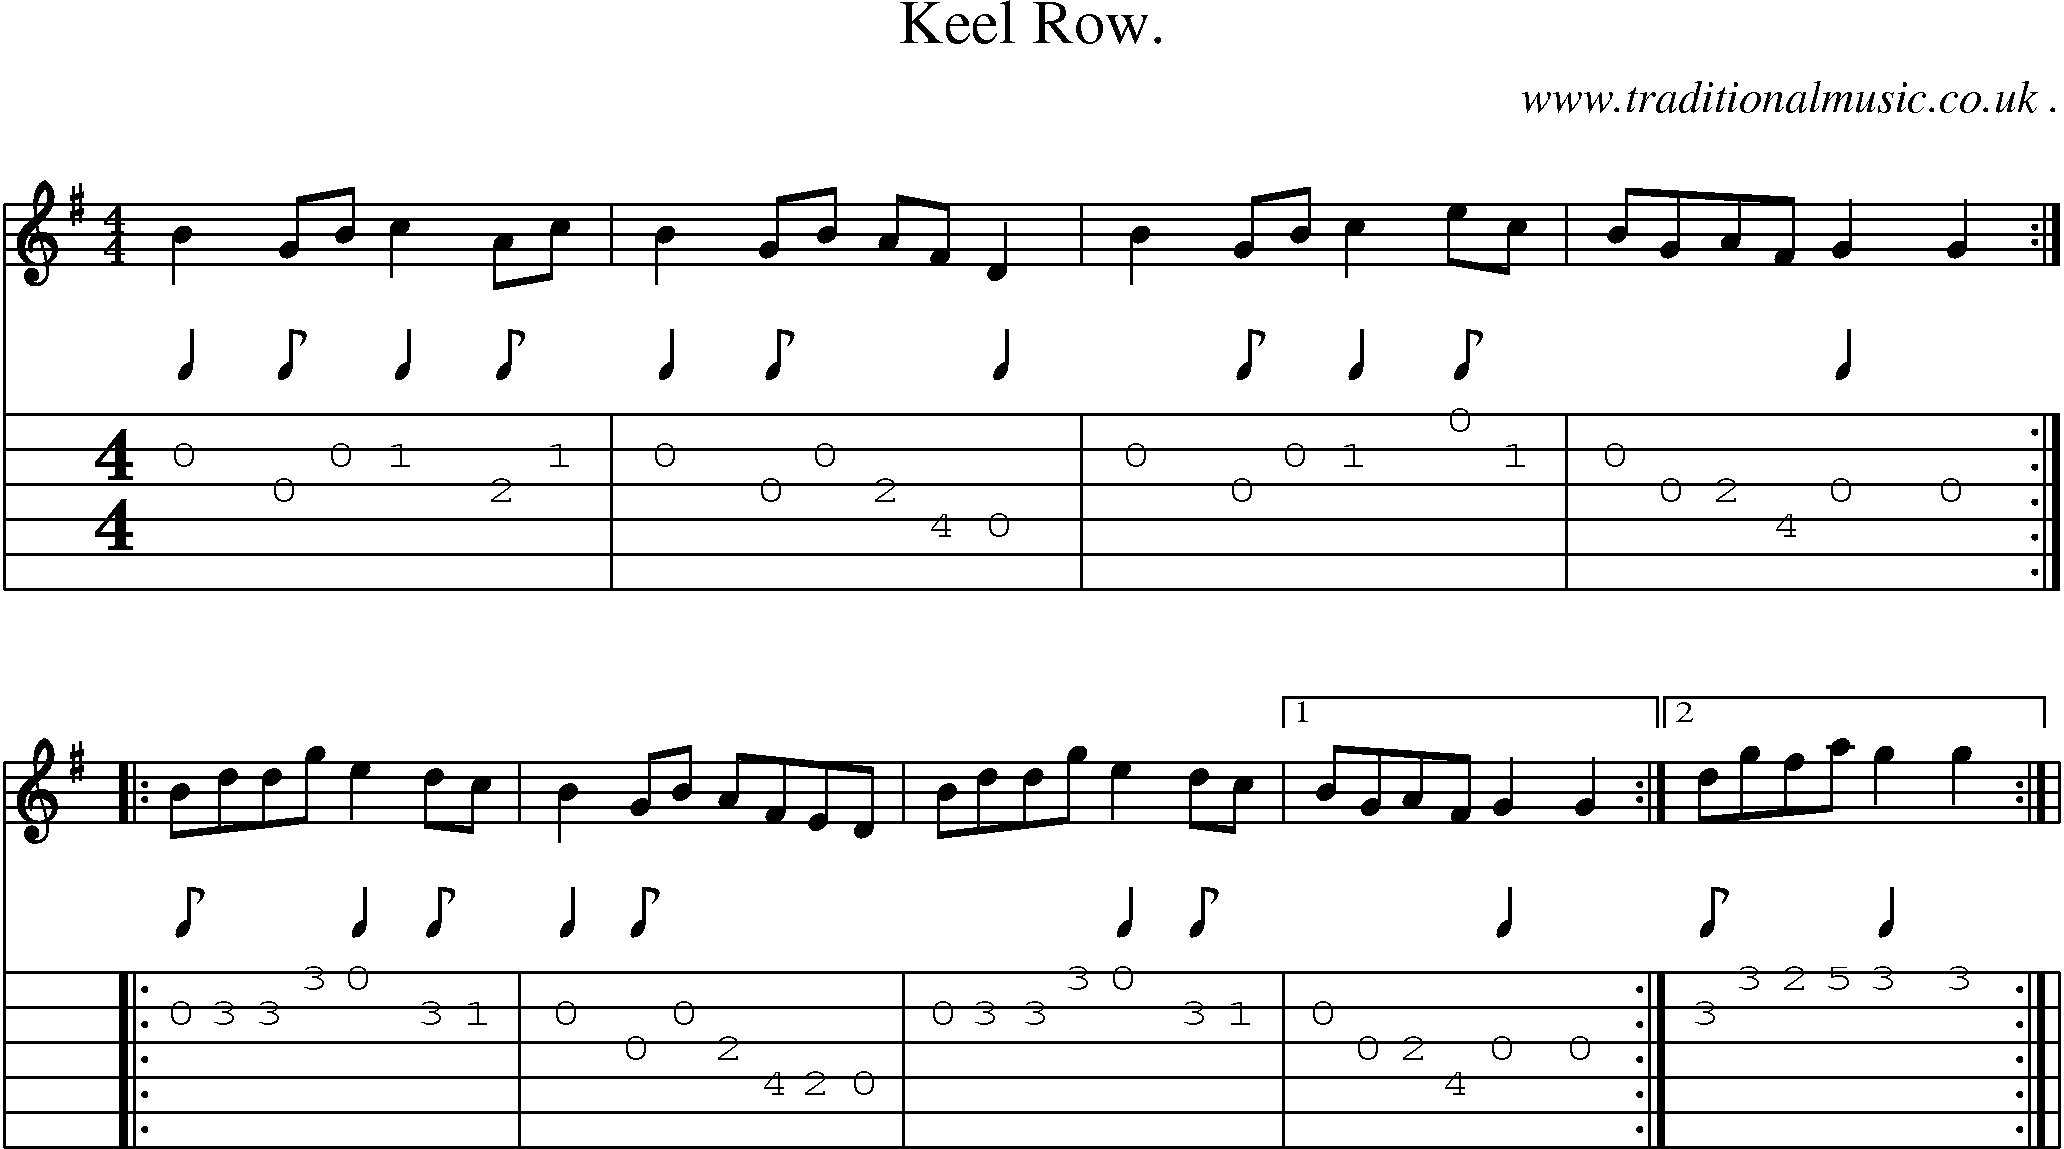 Sheet-Music and Guitar Tabs for Keel Row